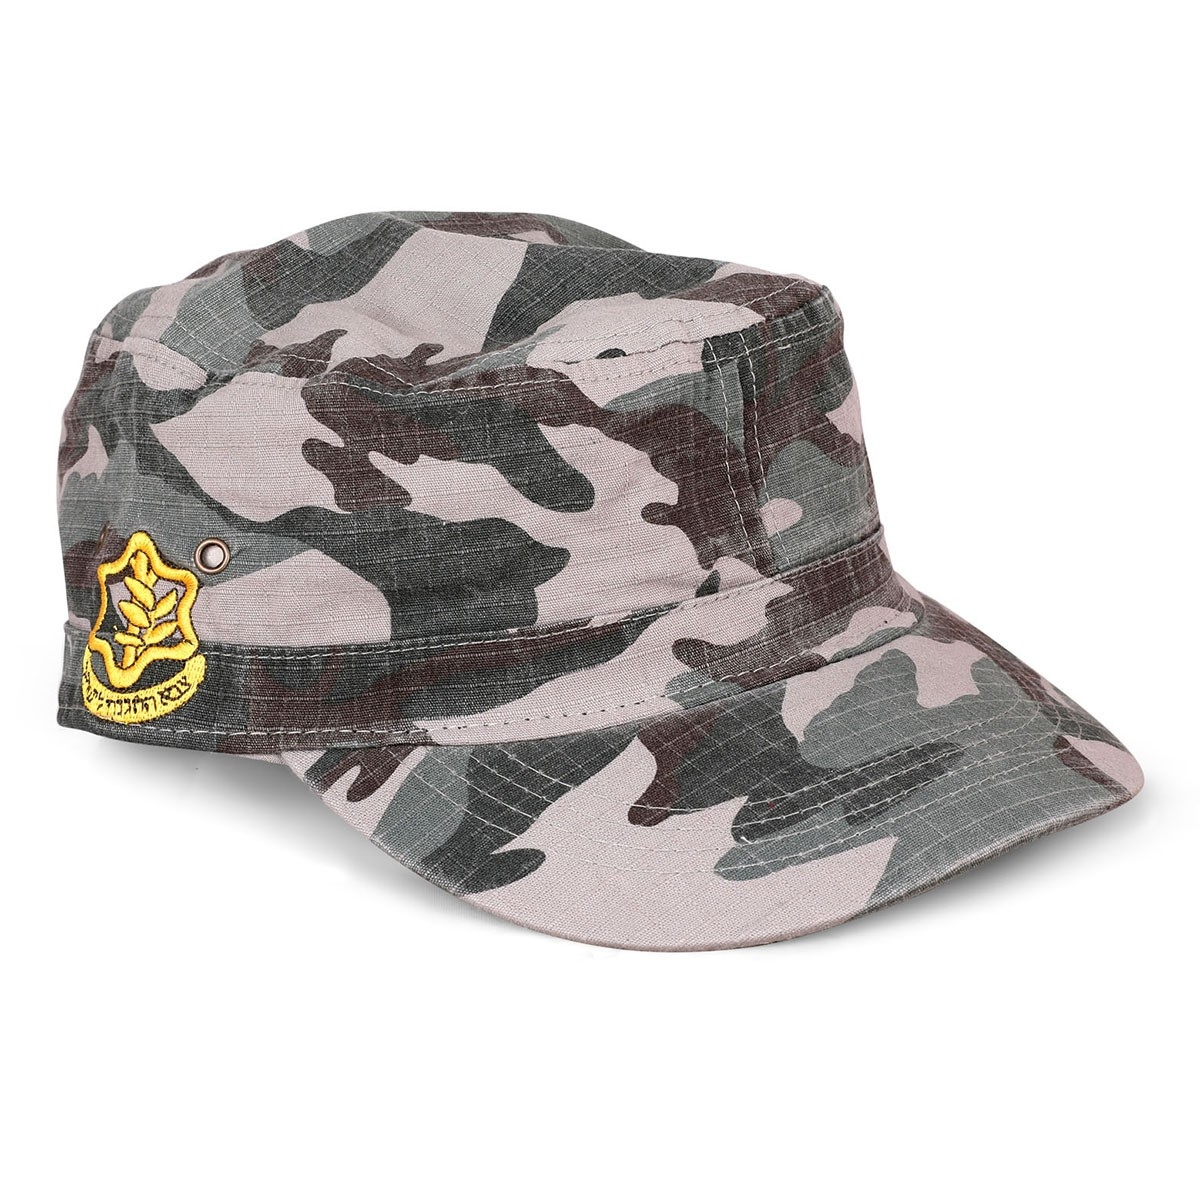 Camouflage Sports Cap with I.D.F. Insignia on Side – One Size, Adjustable - 1